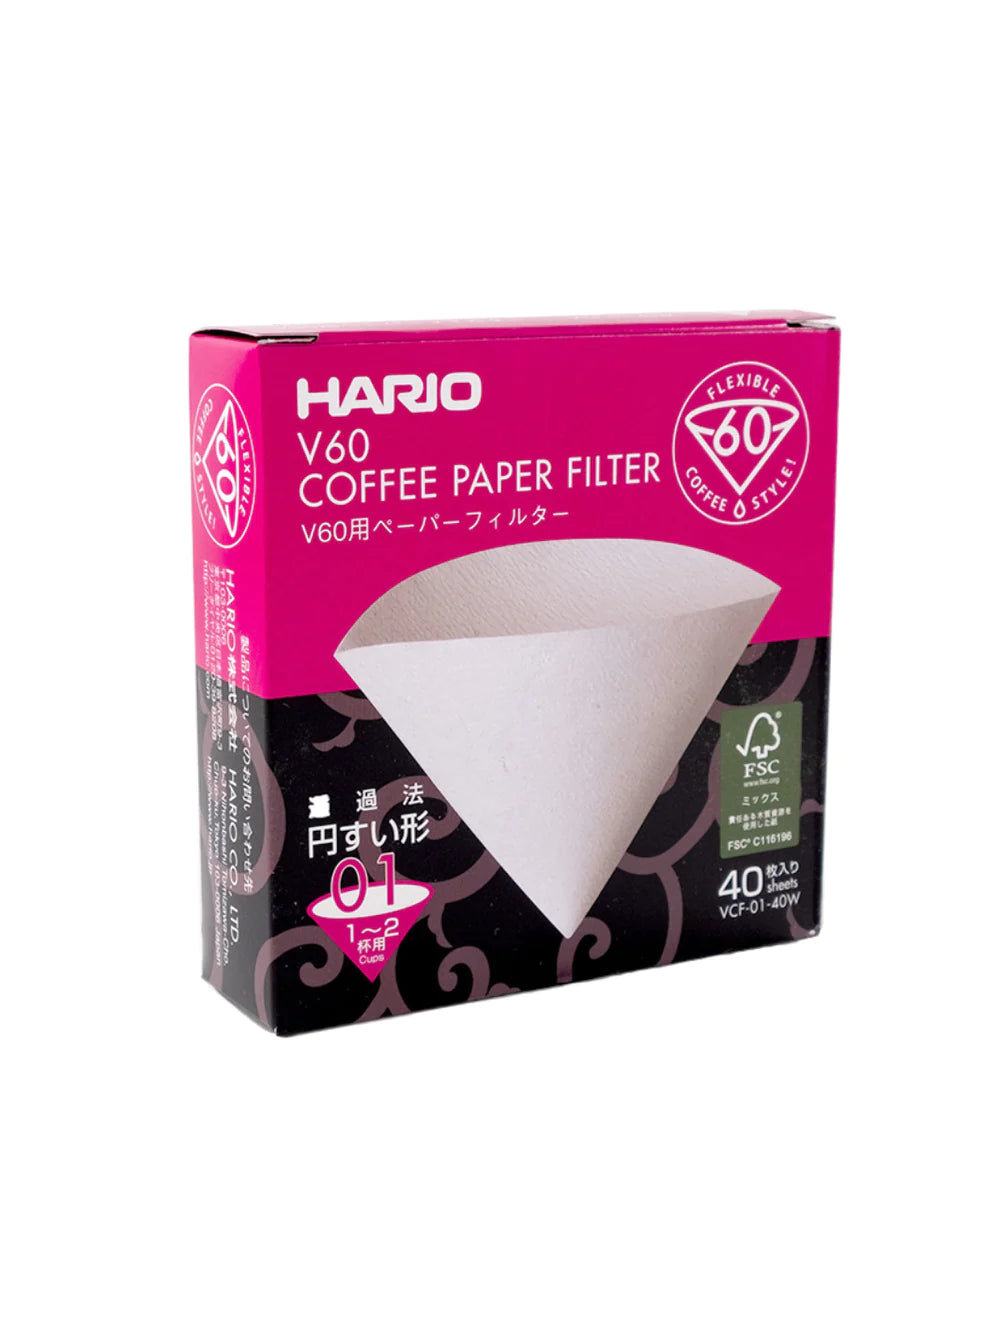 Filters - Hario V60-01 - 40 pack